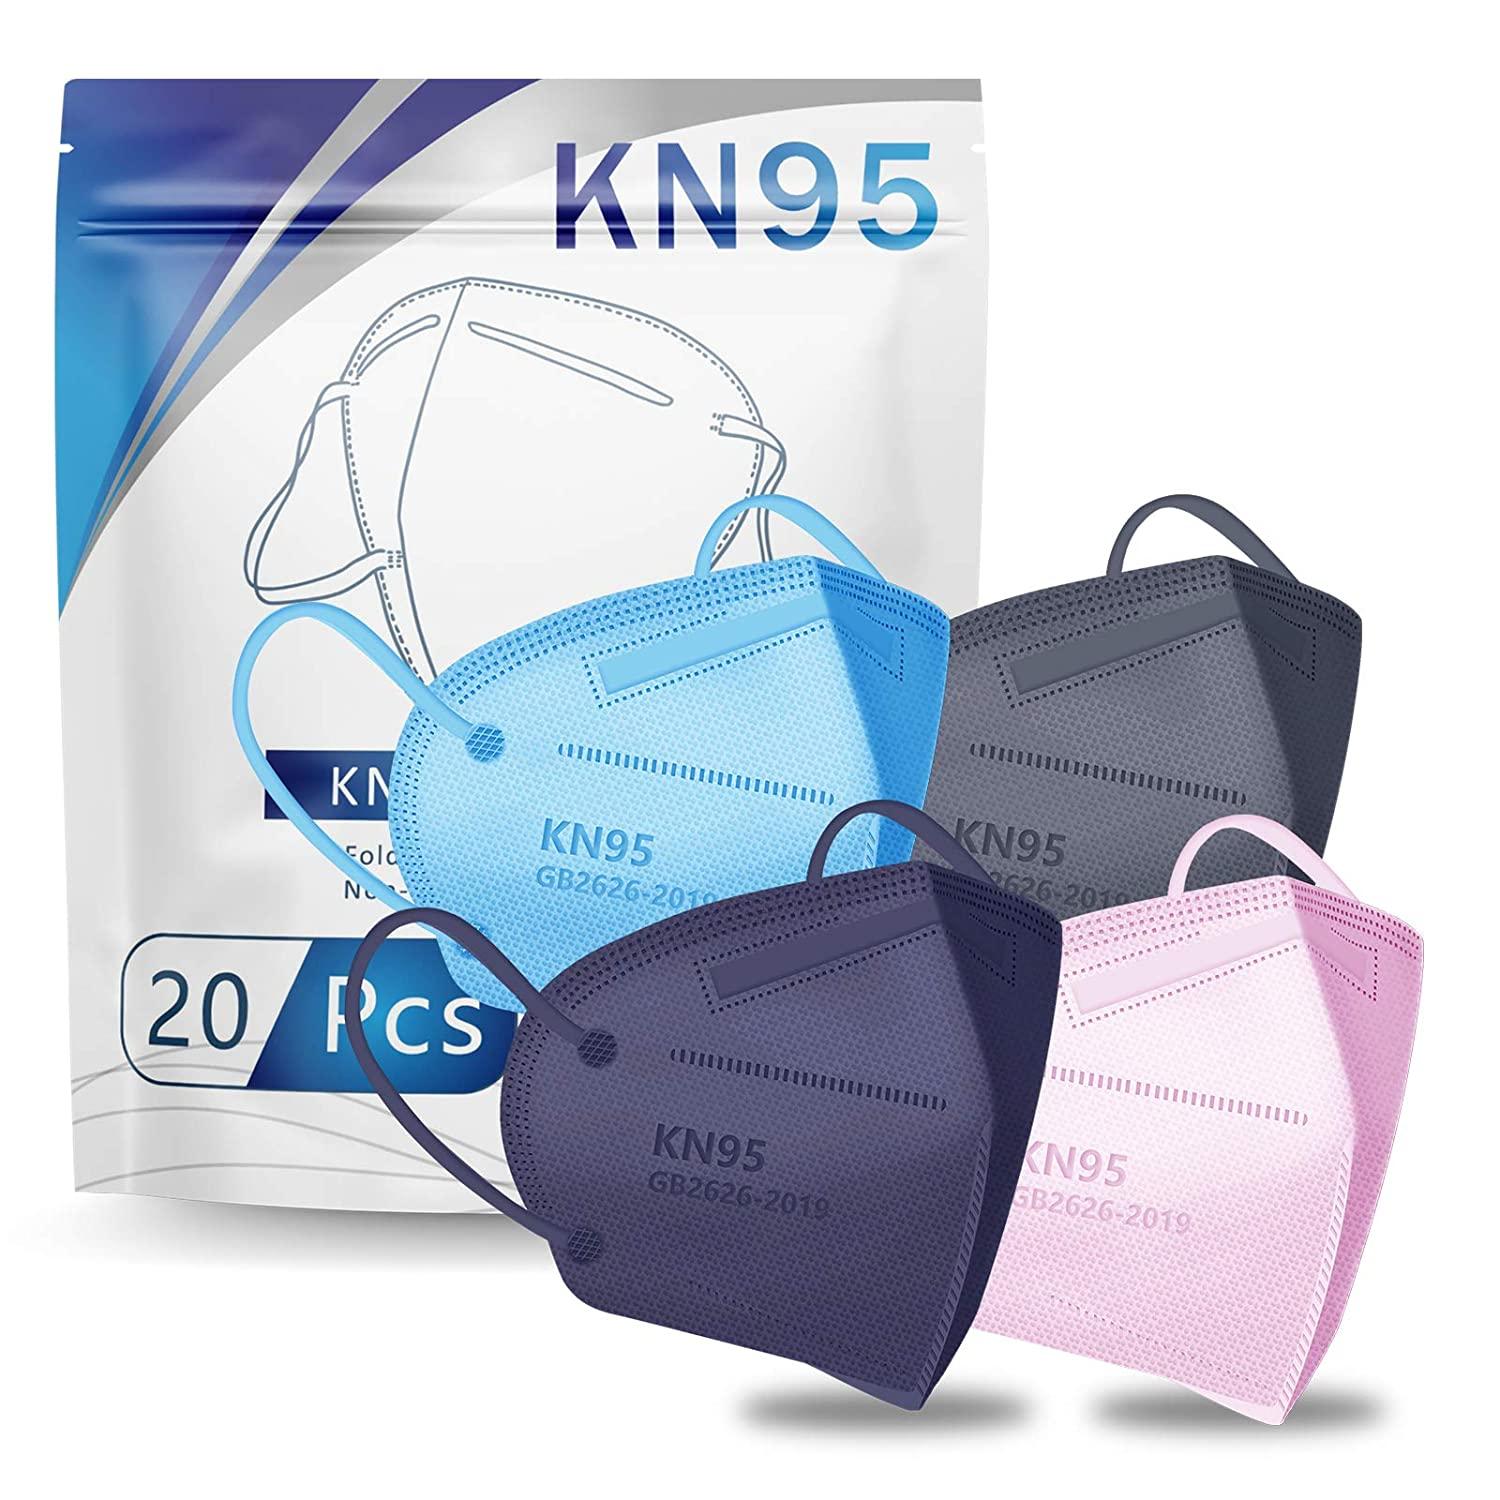 20 Hotodeal KN95 Face Masks for $3